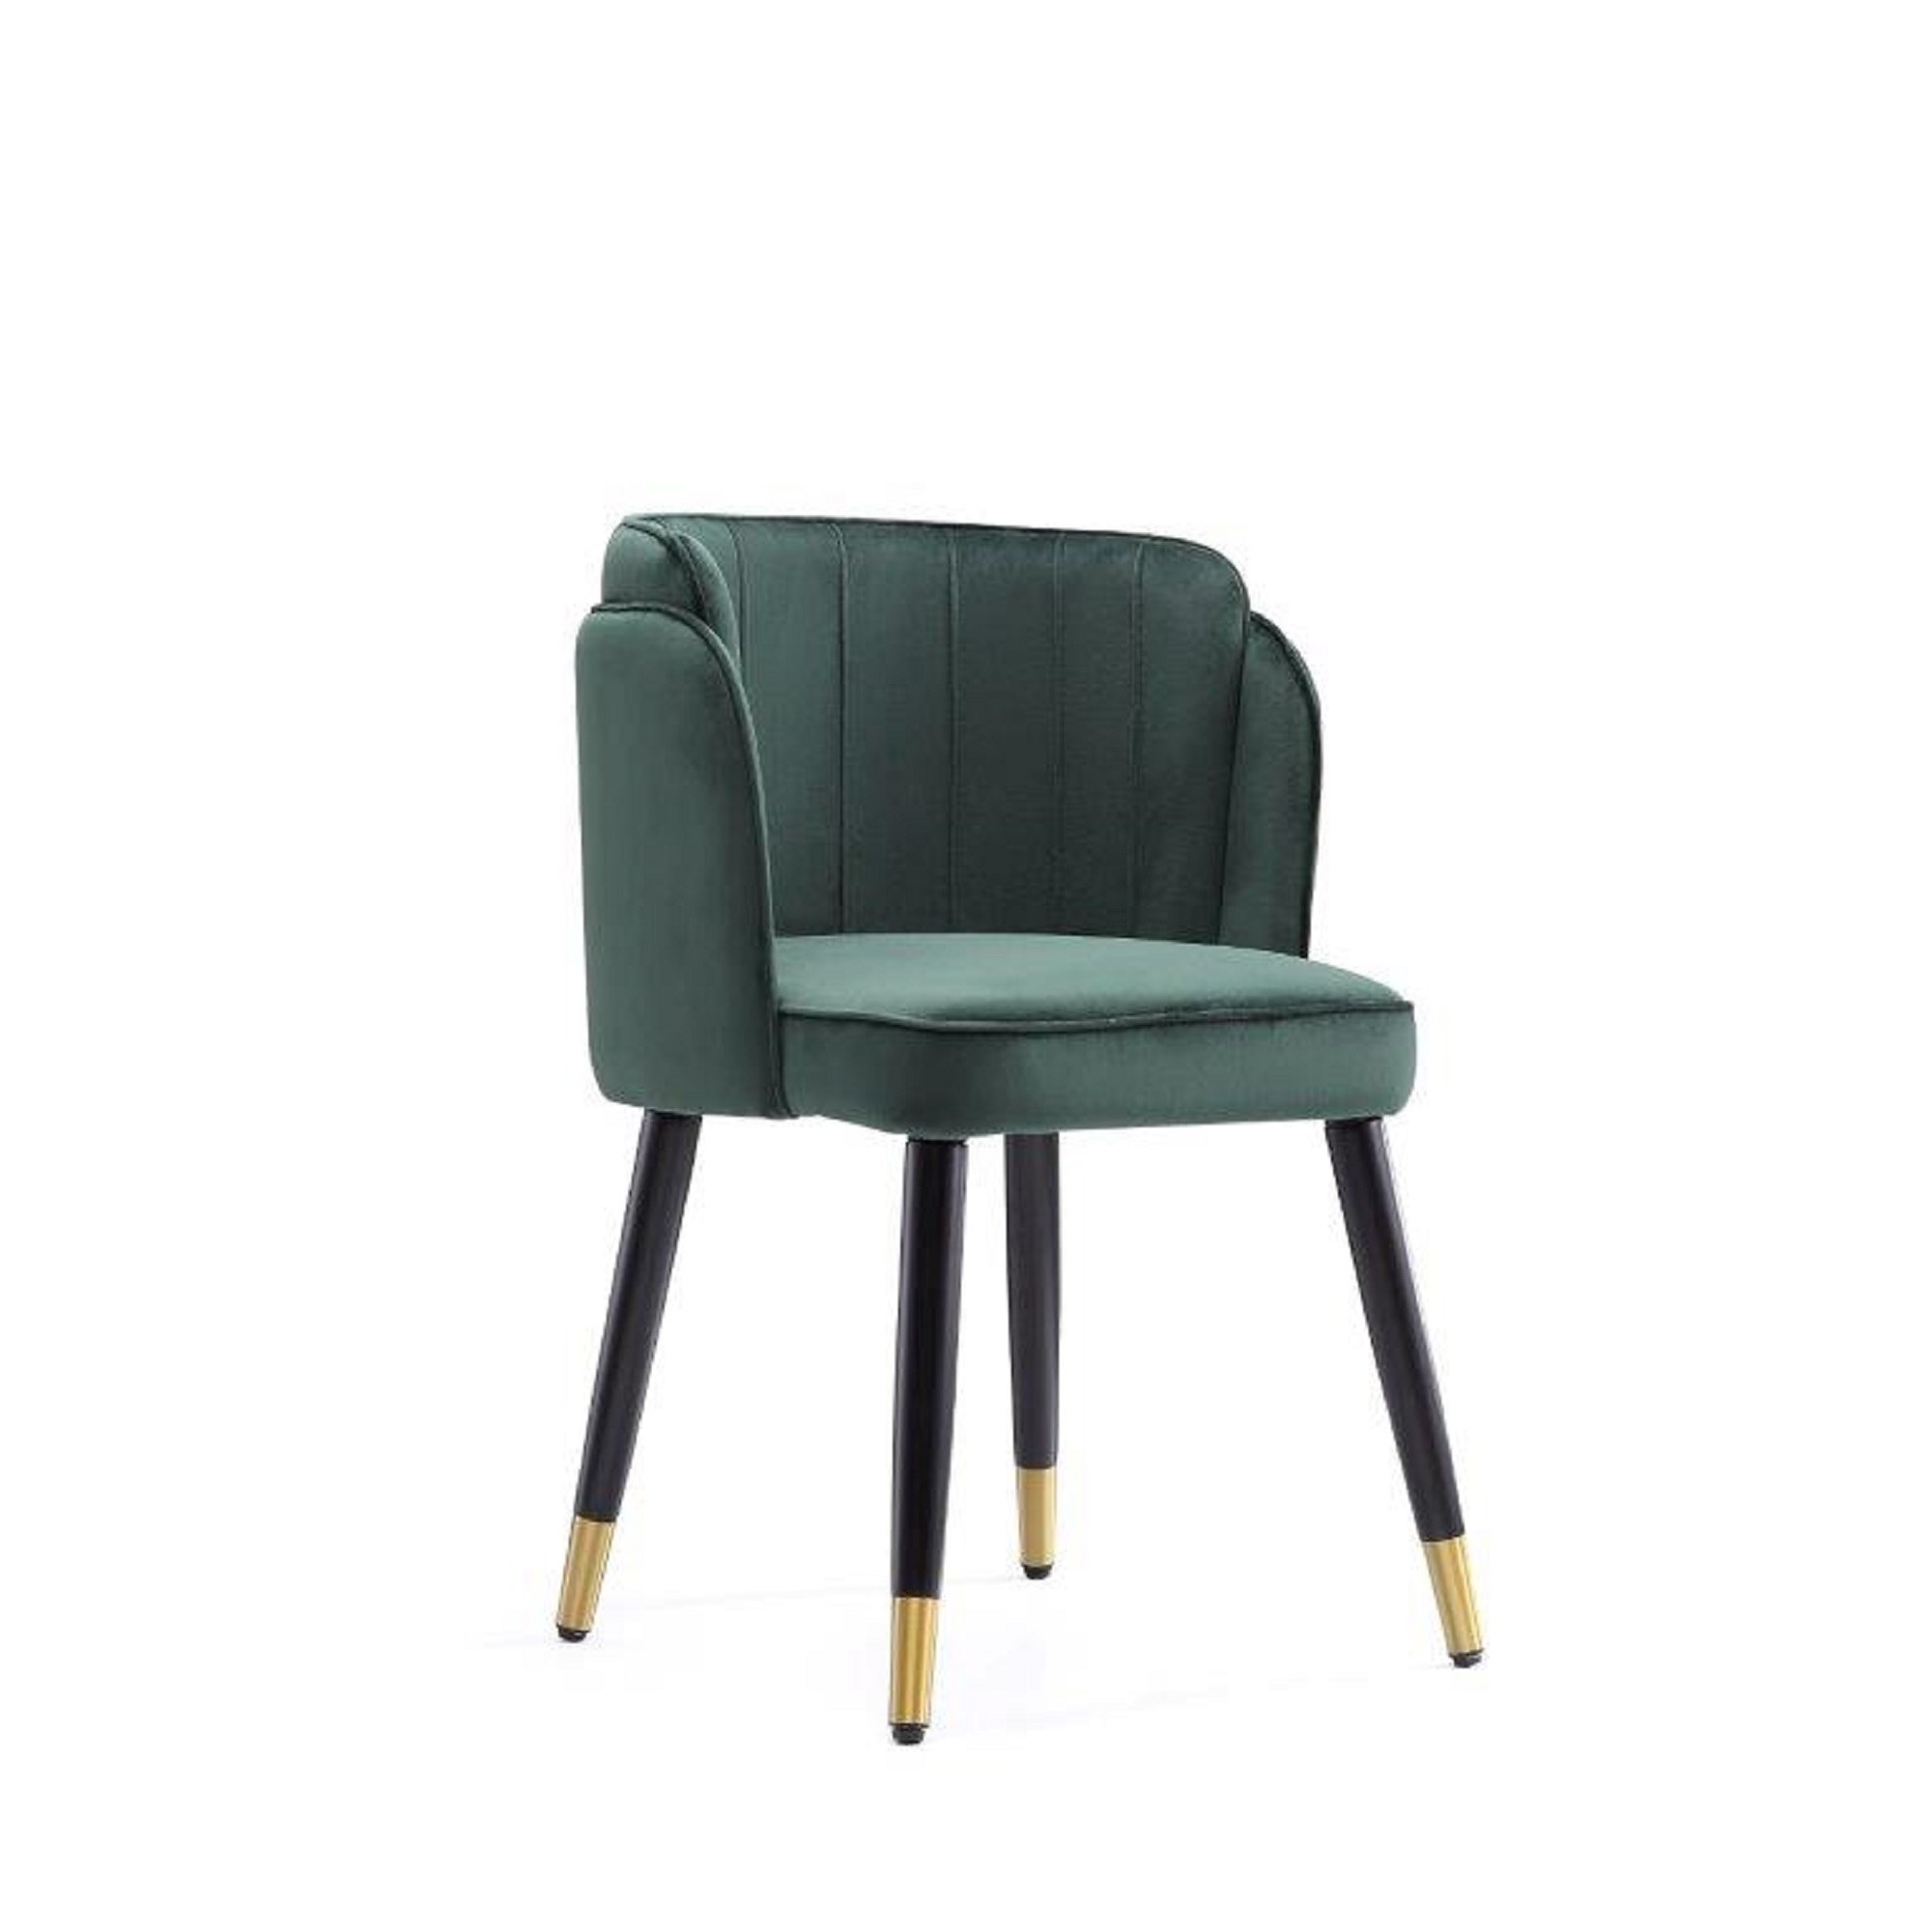 Manhattan Comfort, Zephyr Velvet Chair in Hunter Green, Primary Color Green, Included (qty.) 1 Model DC043